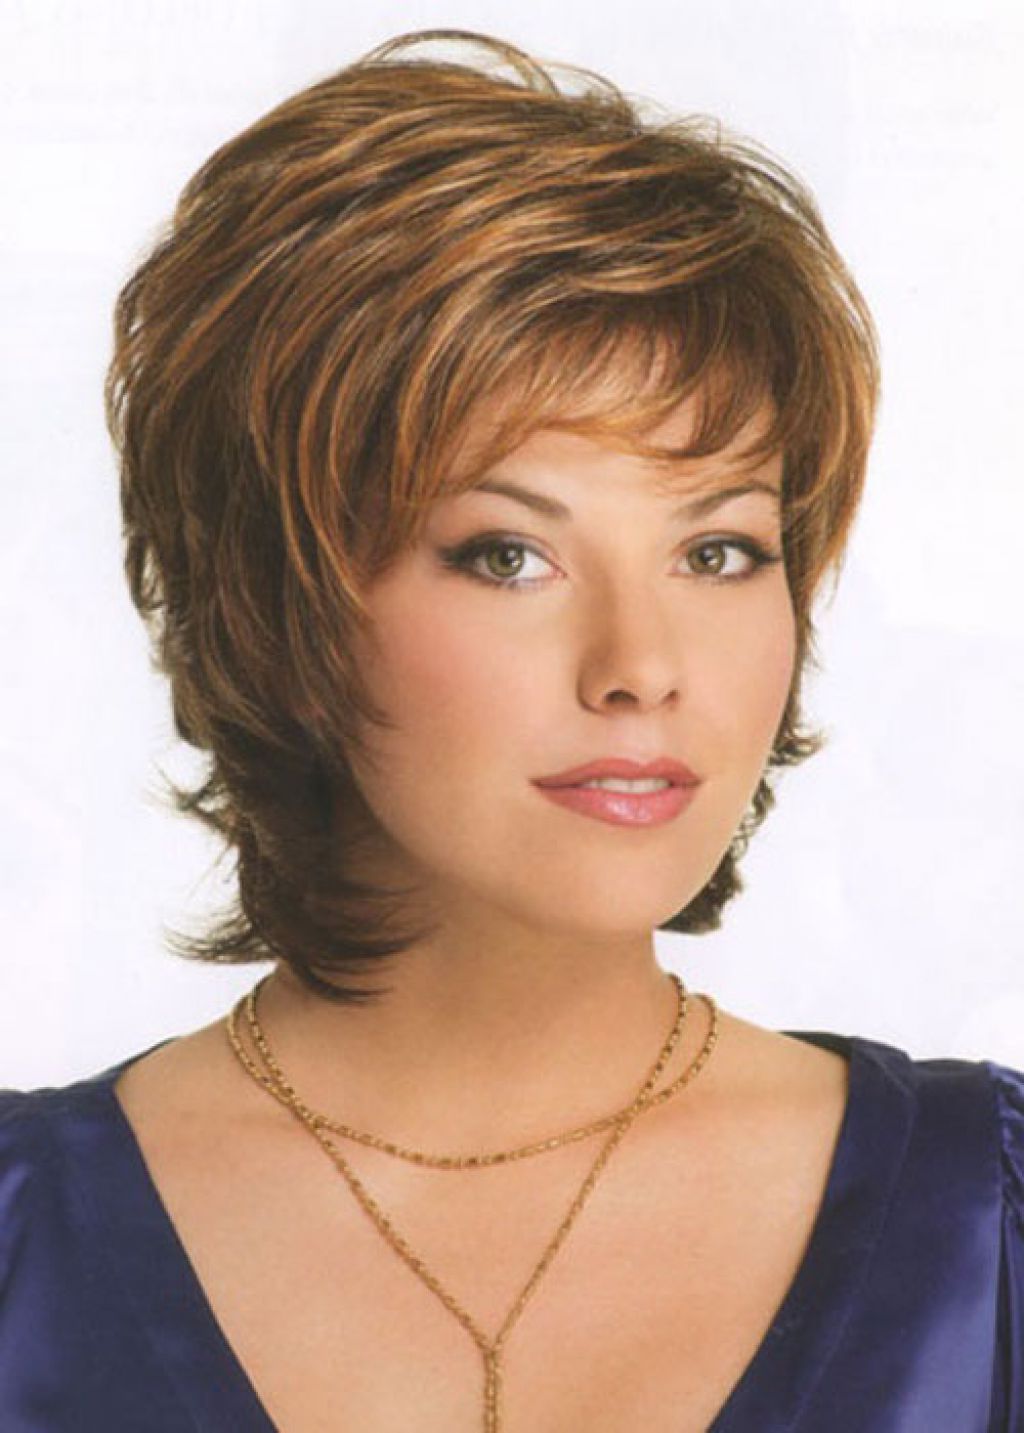 New Short Haircuts For Women Over Chic Short Hairstyles For Women Intended For Chic Short Haircuts (View 19 of 25)